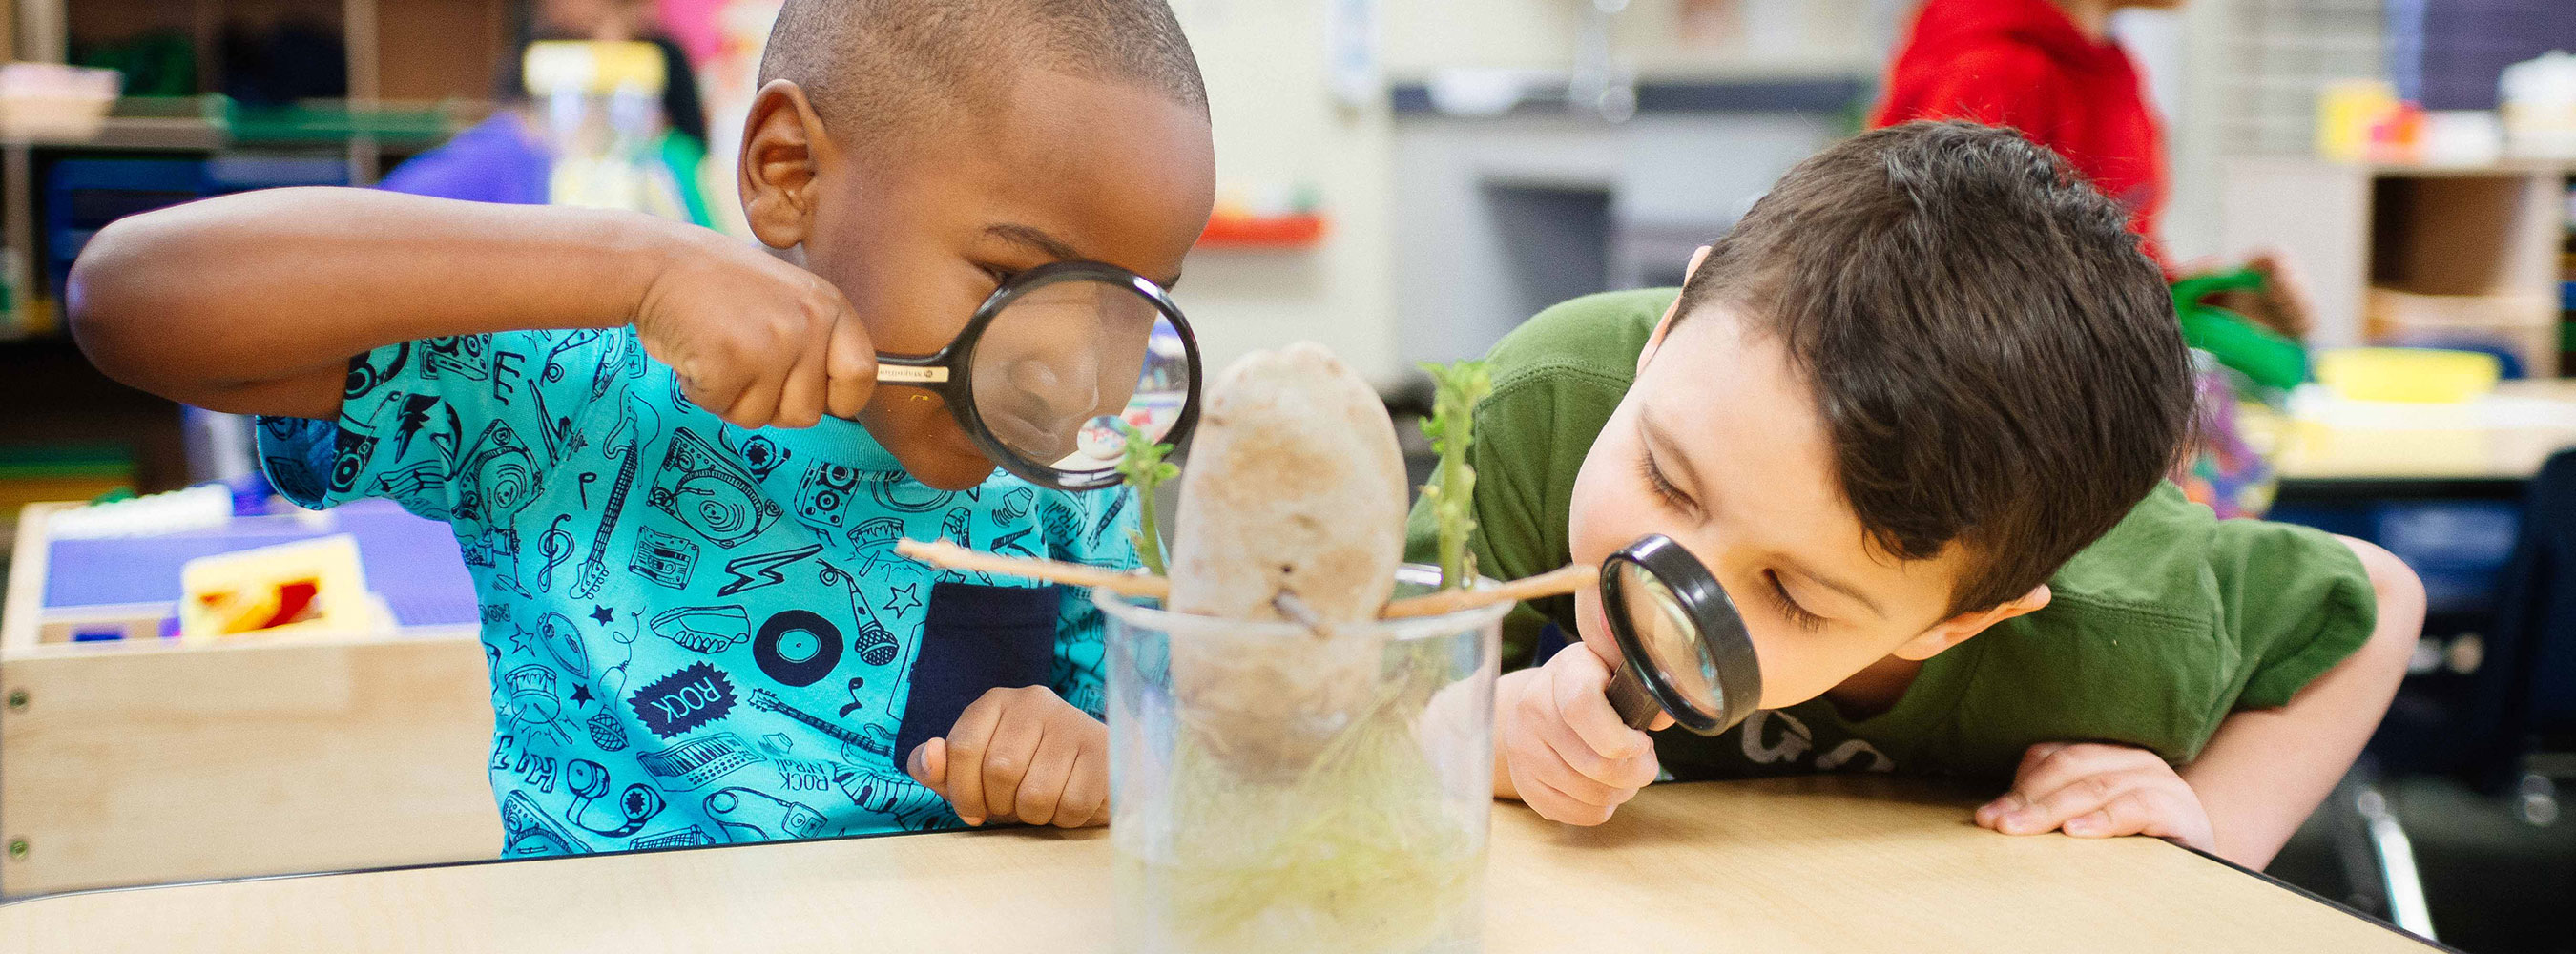 Two elementary school student boys each using a magnifying glass to look at a potato growing experiment in the classroom.